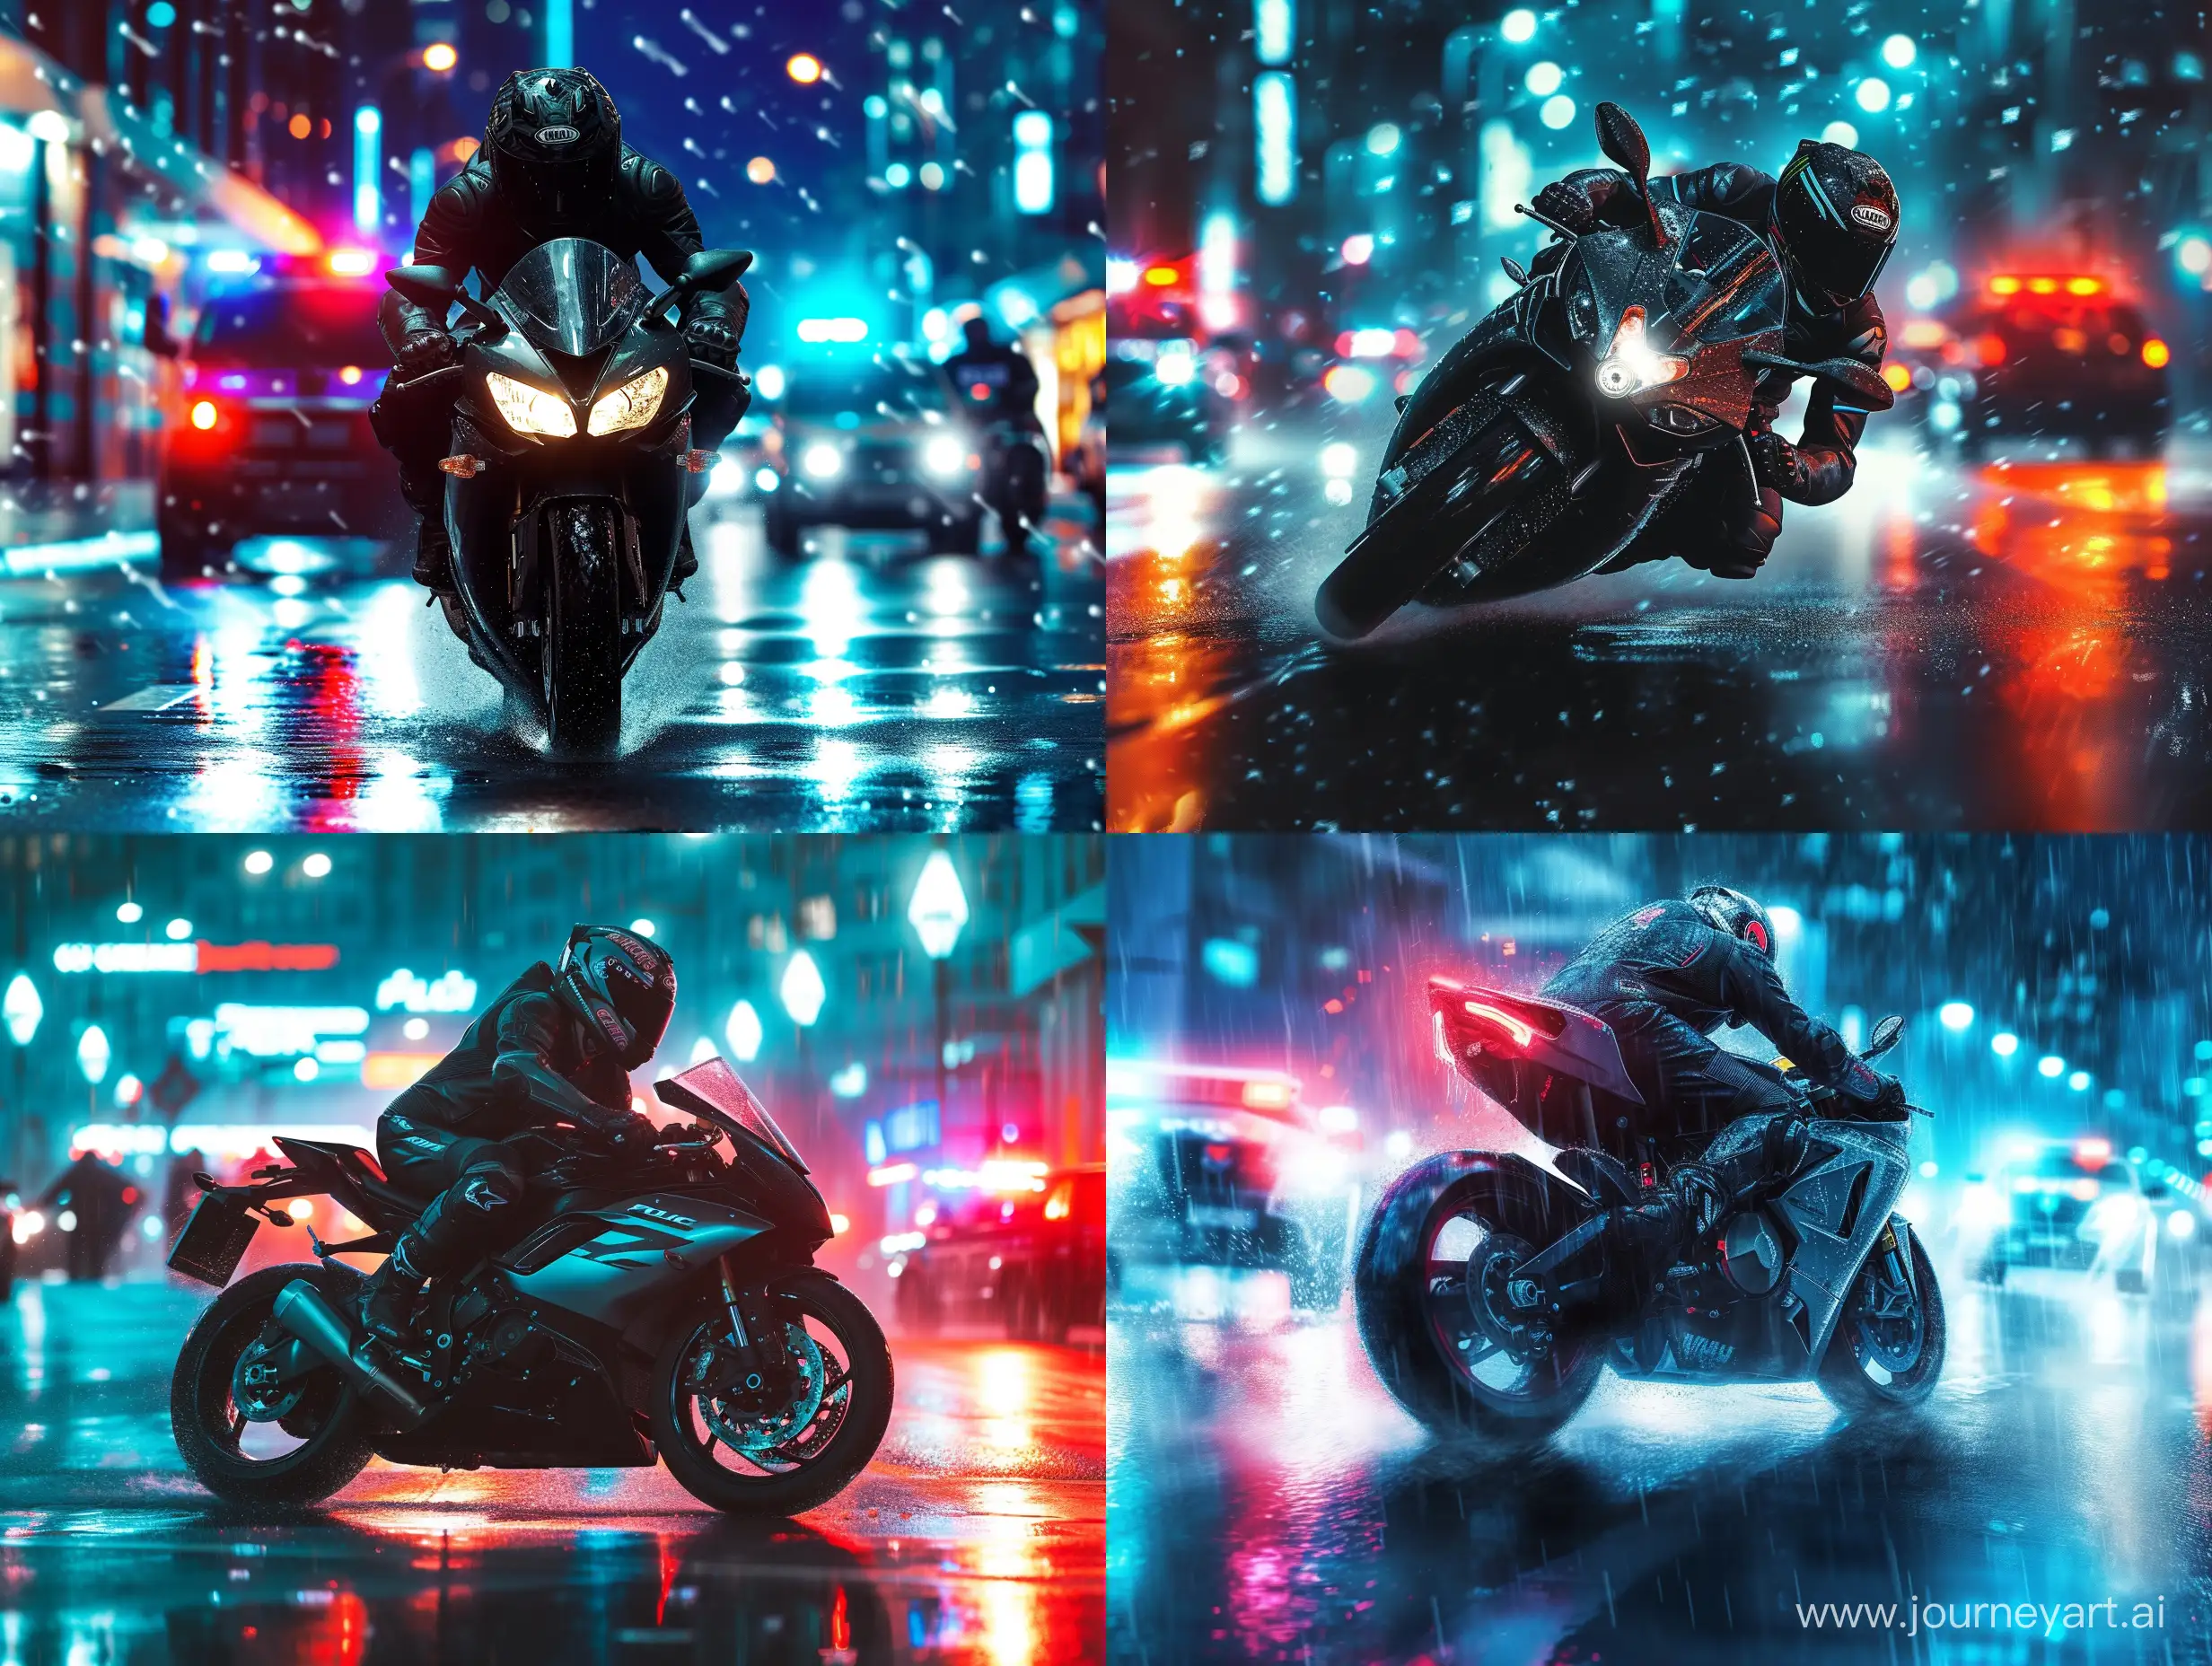 A biker in a helmet rides a sports motorcycle through the night city, dark colors, rain, police, cinematic aesthetics